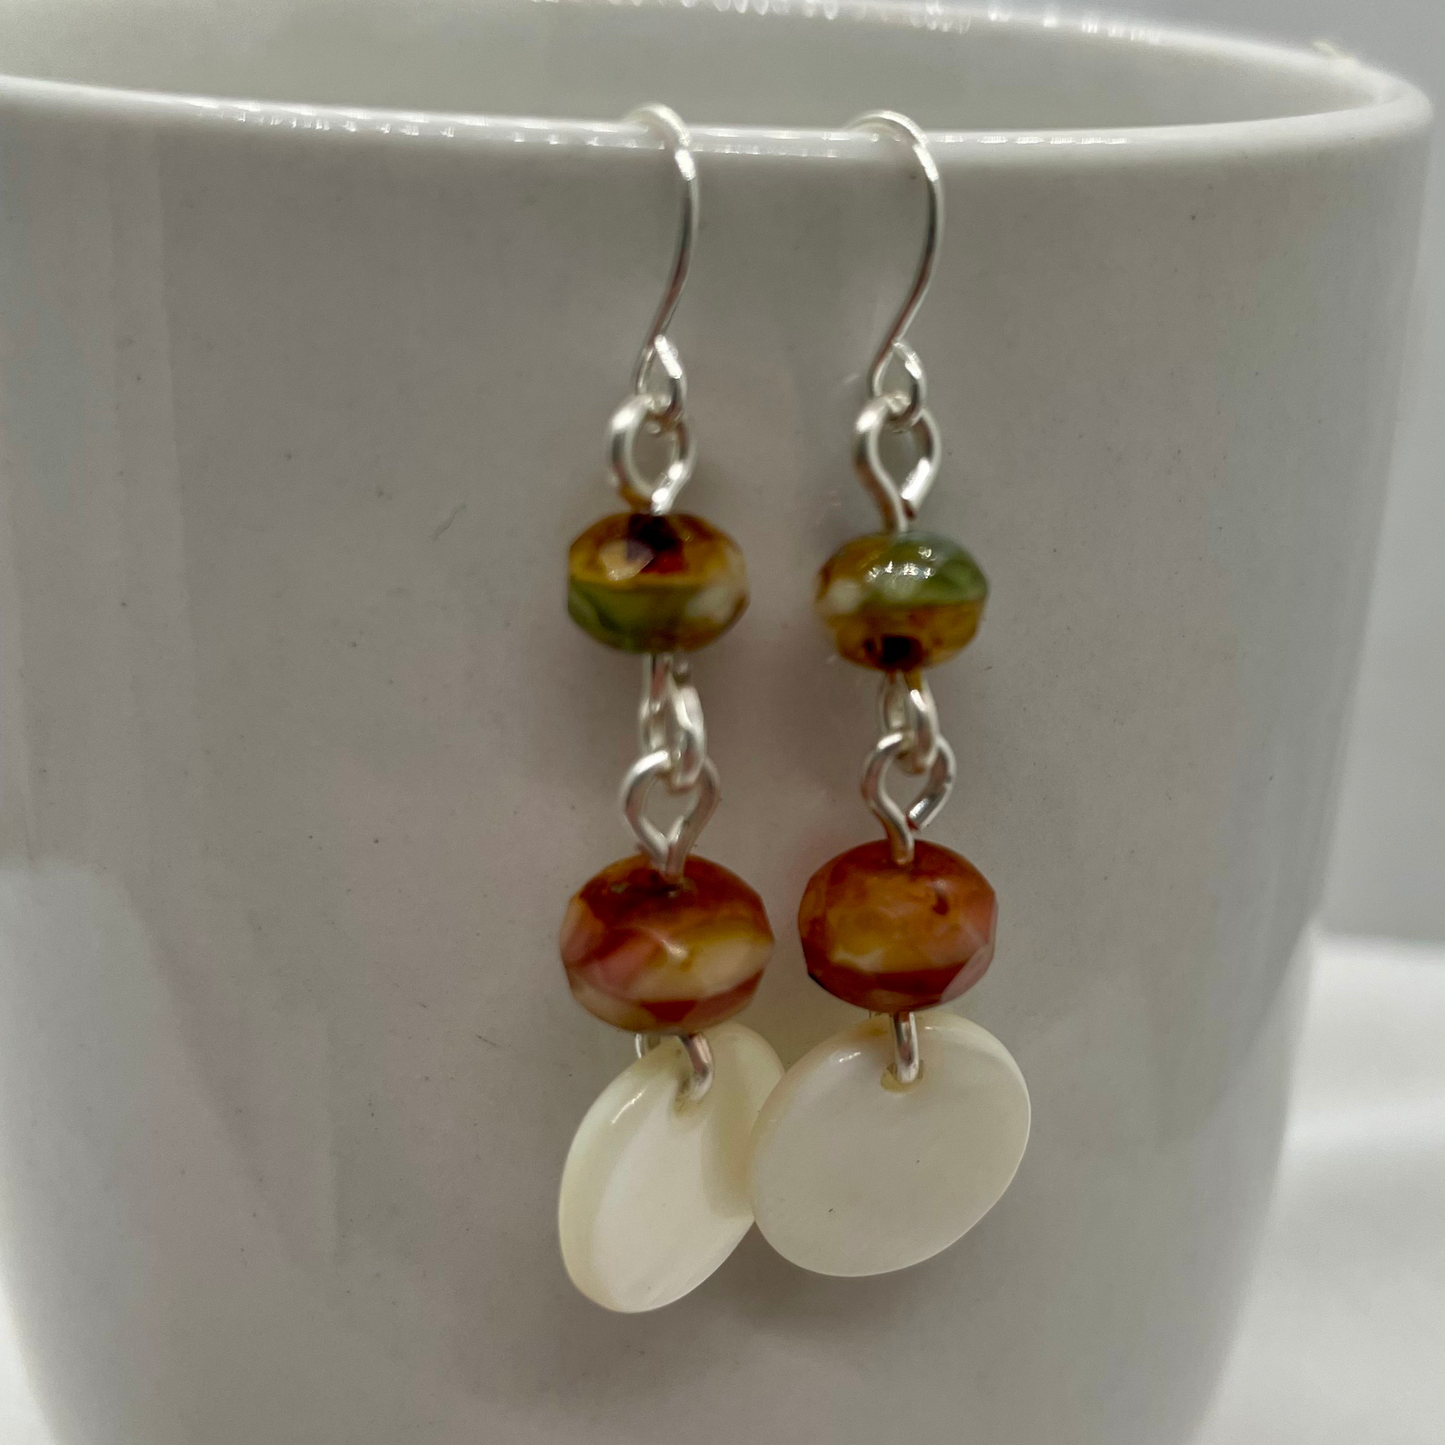 Boho Harmony: Czech fire-polished Picasso Beads and Mother of Pearl Drop Earrings | gift idea | summer fun | one of a kind | artisan crafted